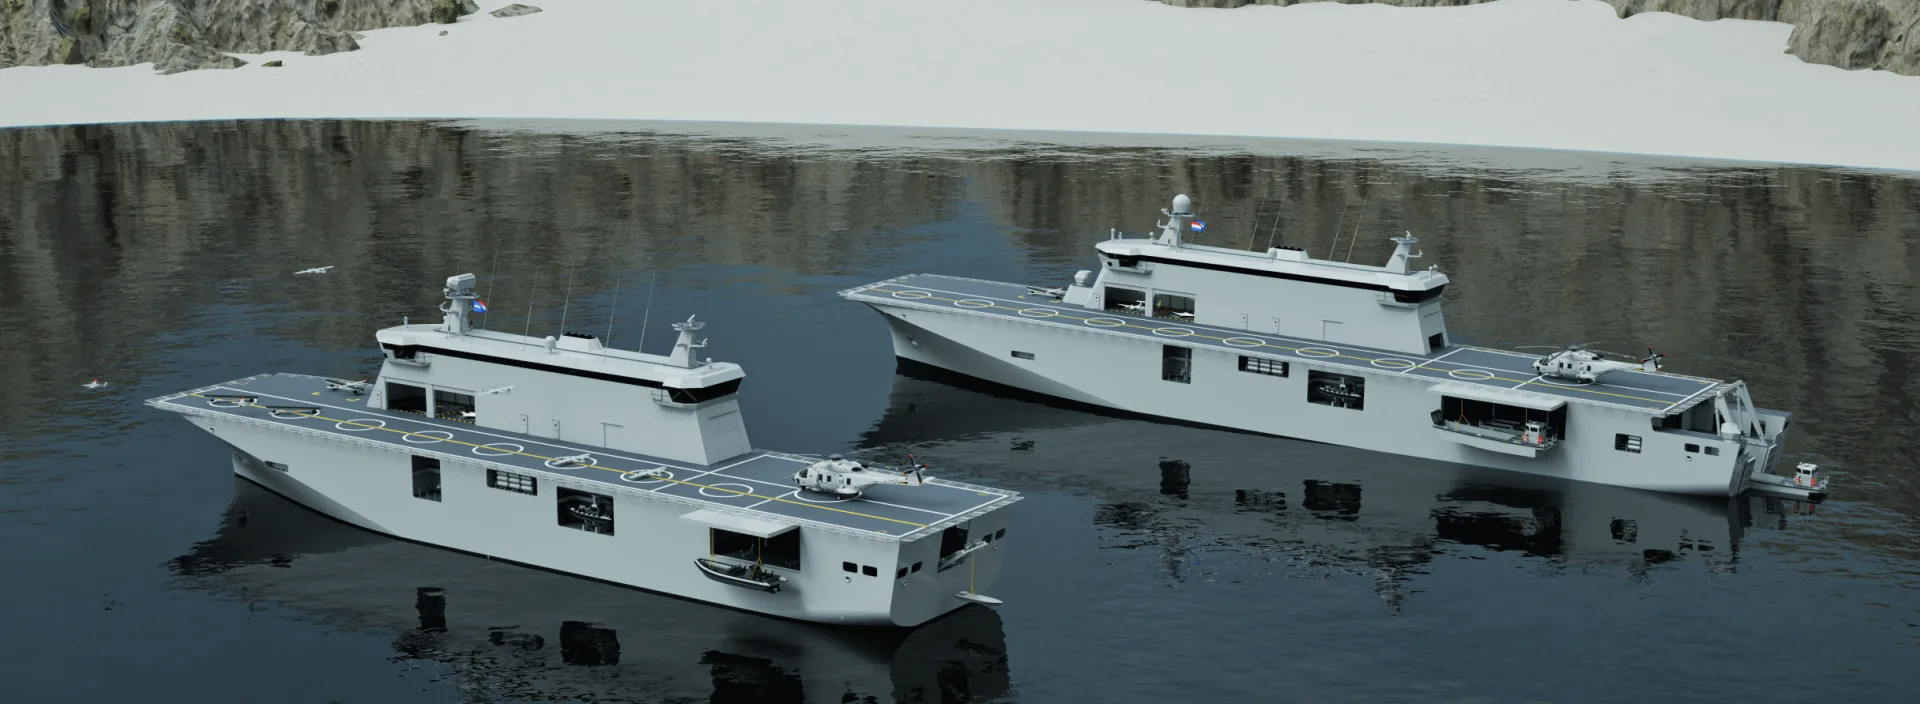 Artist's rendering of the Multi-Purpose Support Ship in 7,000 and 9,000-ton variants. Photo: Damen Shipyards